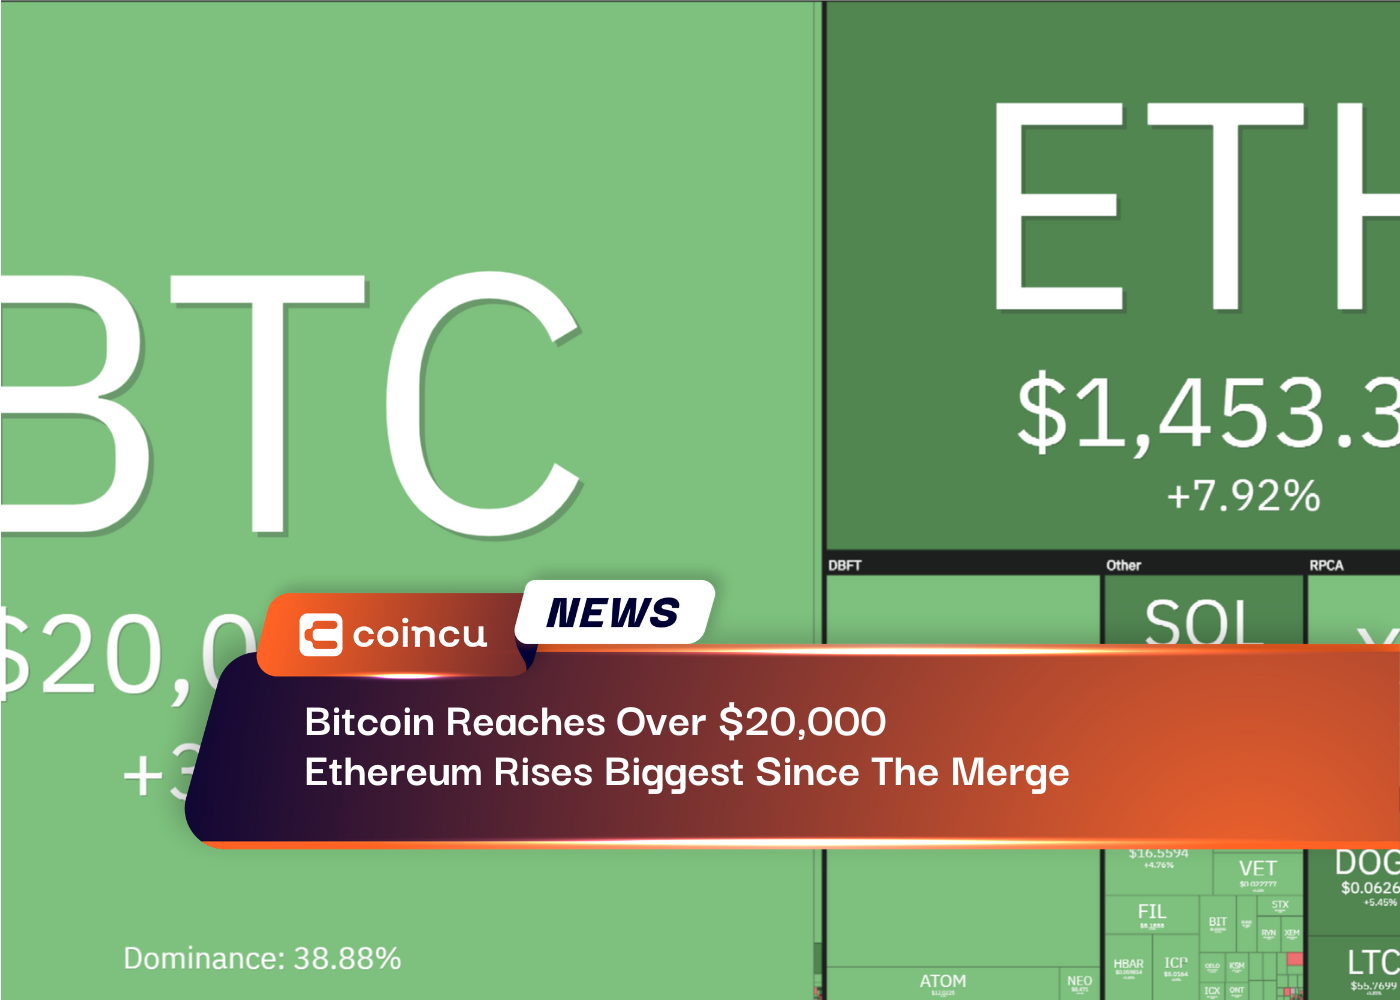 Bitcoin Reaches Over $20,000, Ethereum Rises Biggest Since The Merge